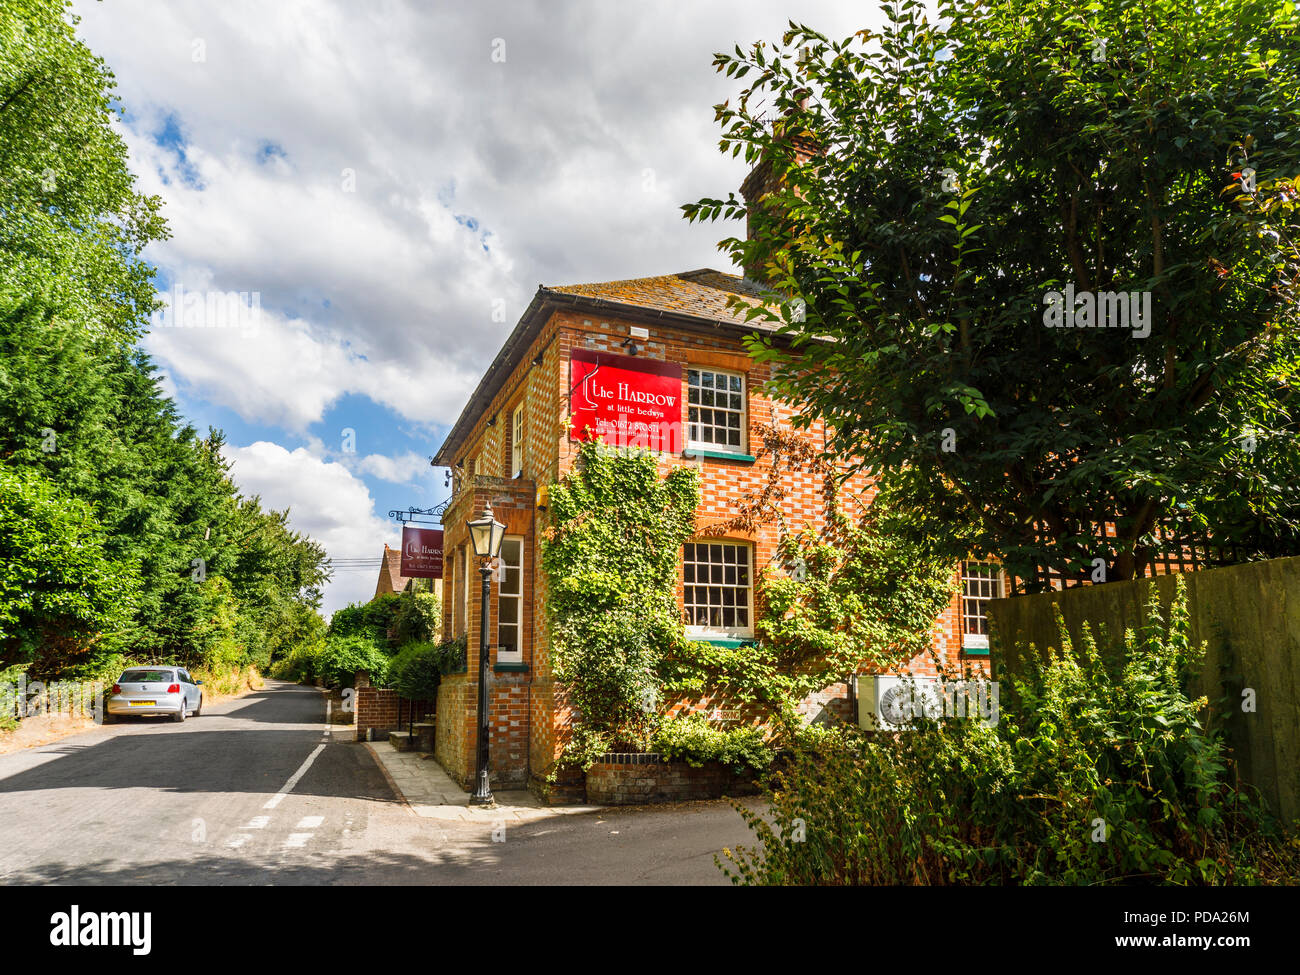 The Harrow, a Michelin starred restaurant in Little Bedwyn, a small rural village in Wiltshire, southern England in summer Stock Photo